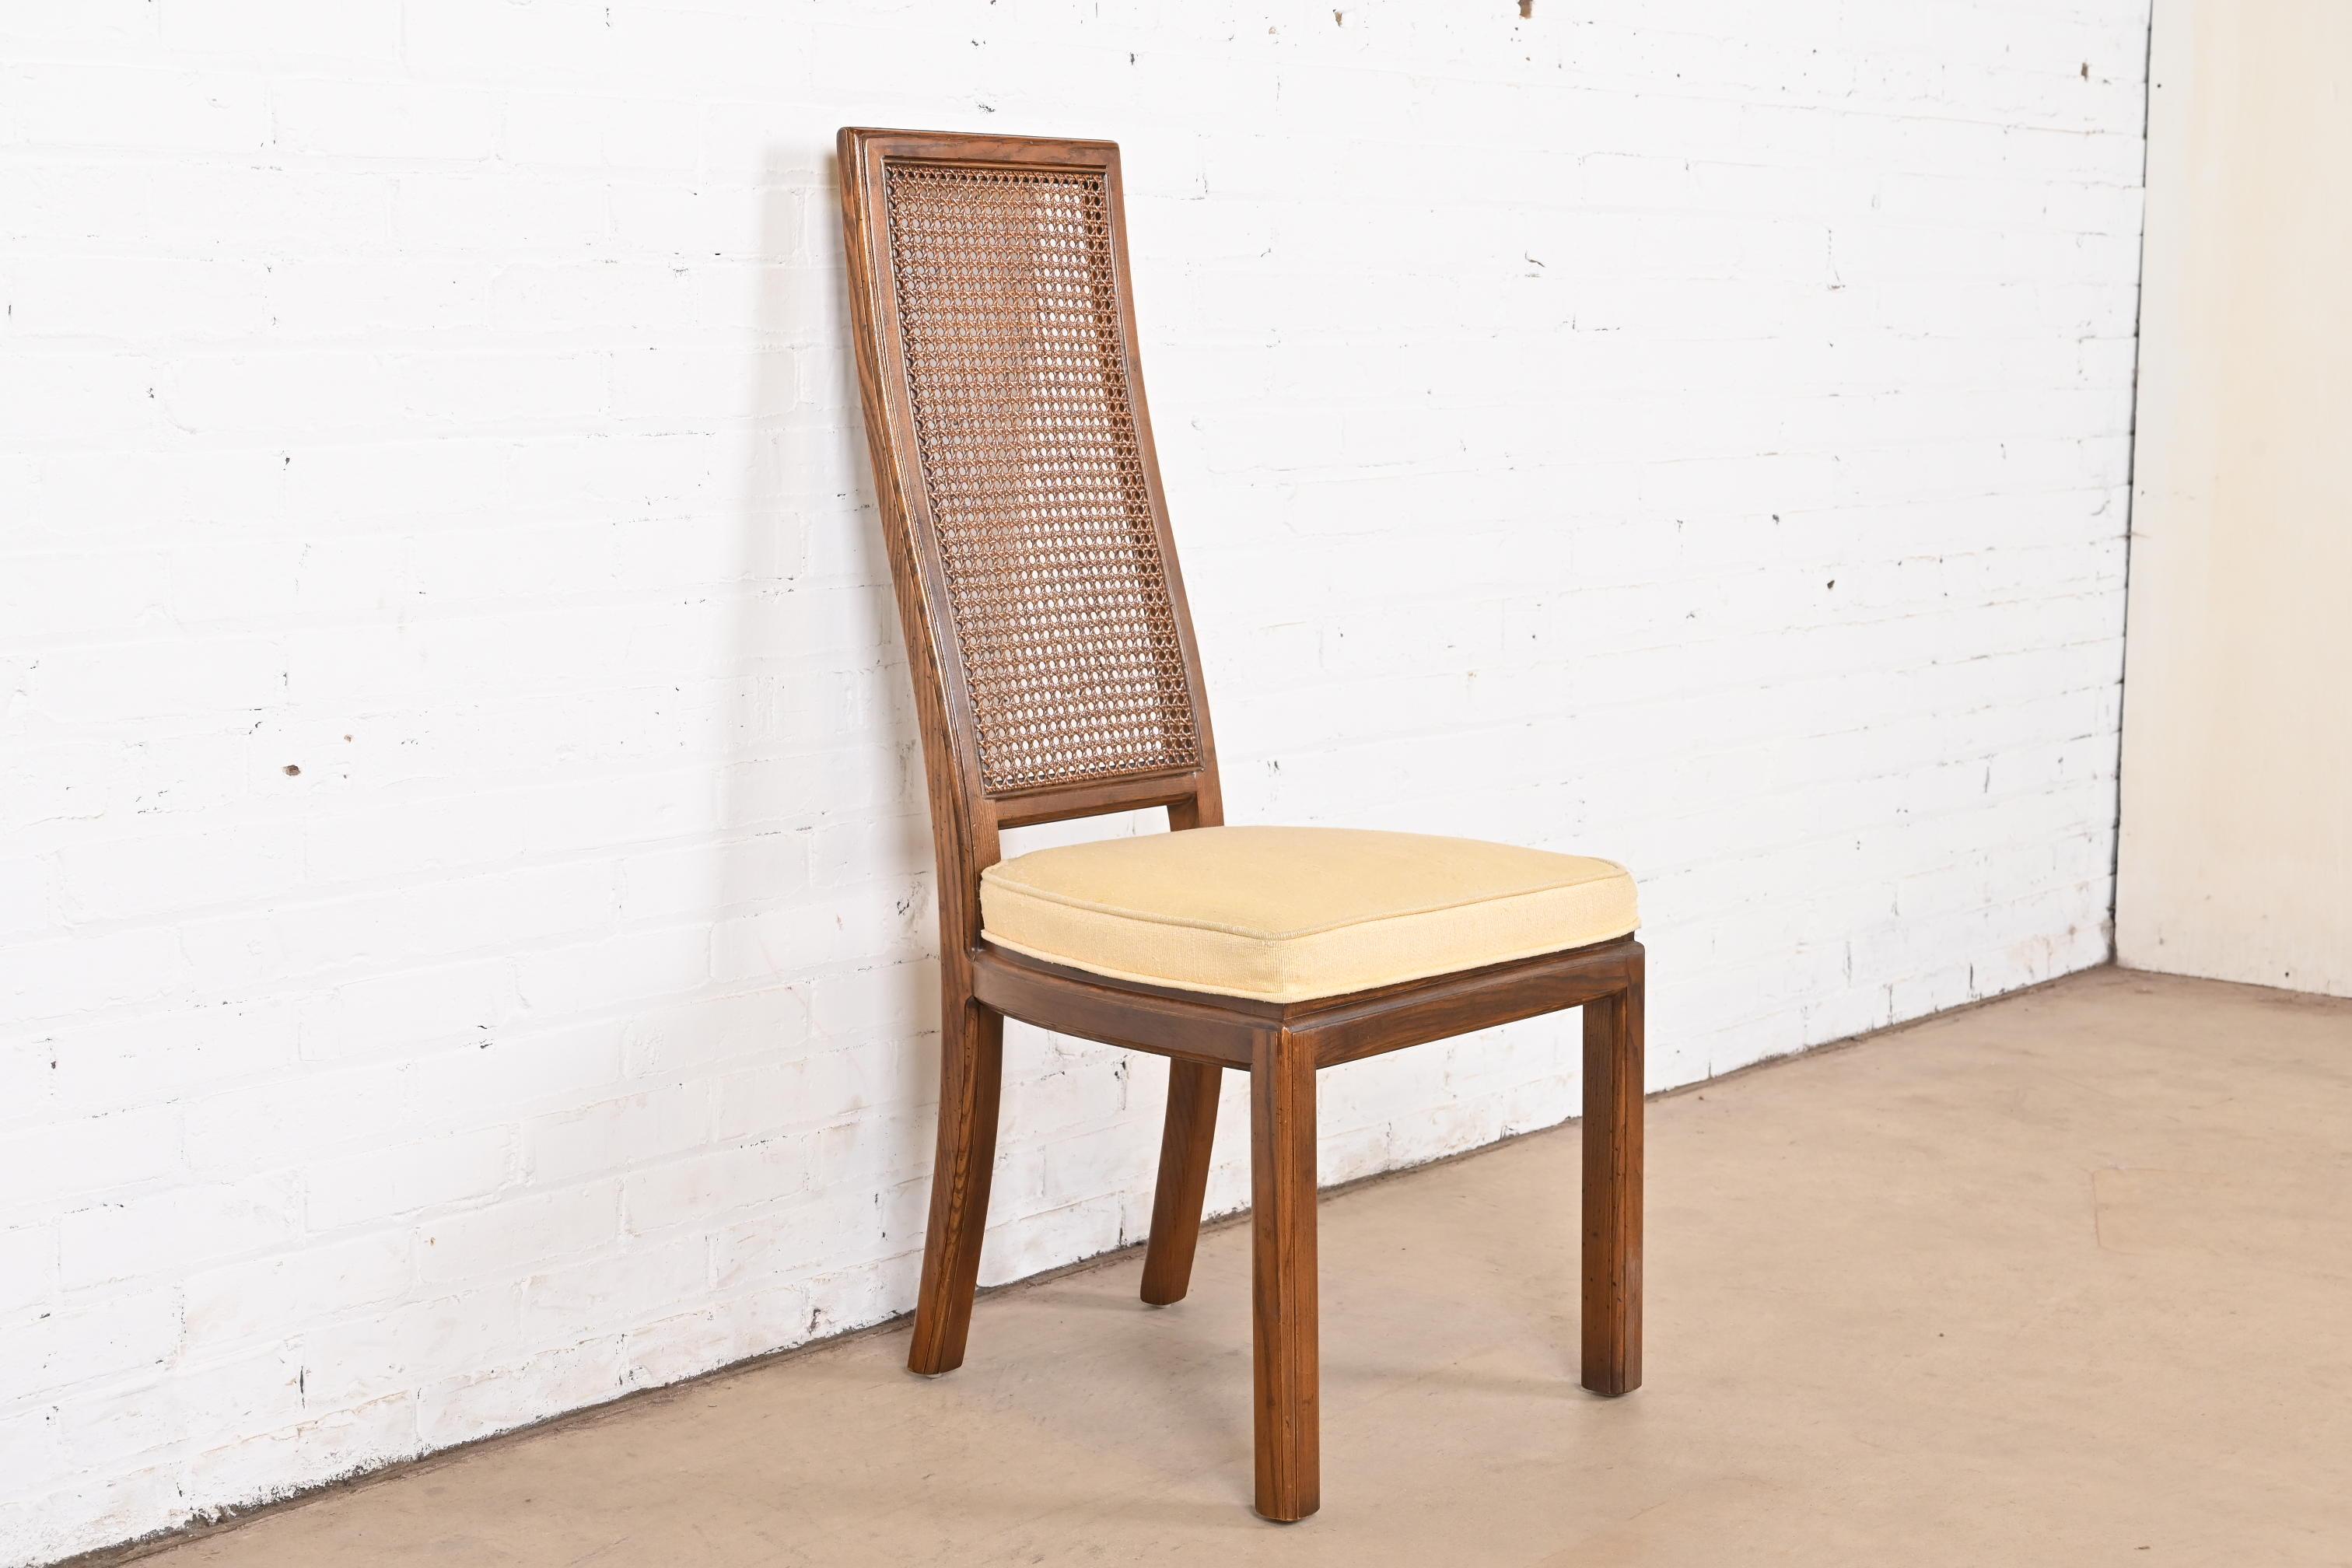 Henredon Mid-Century Modern Oak and Cane High Back Side Chair, Circa 1970s For Sale 1